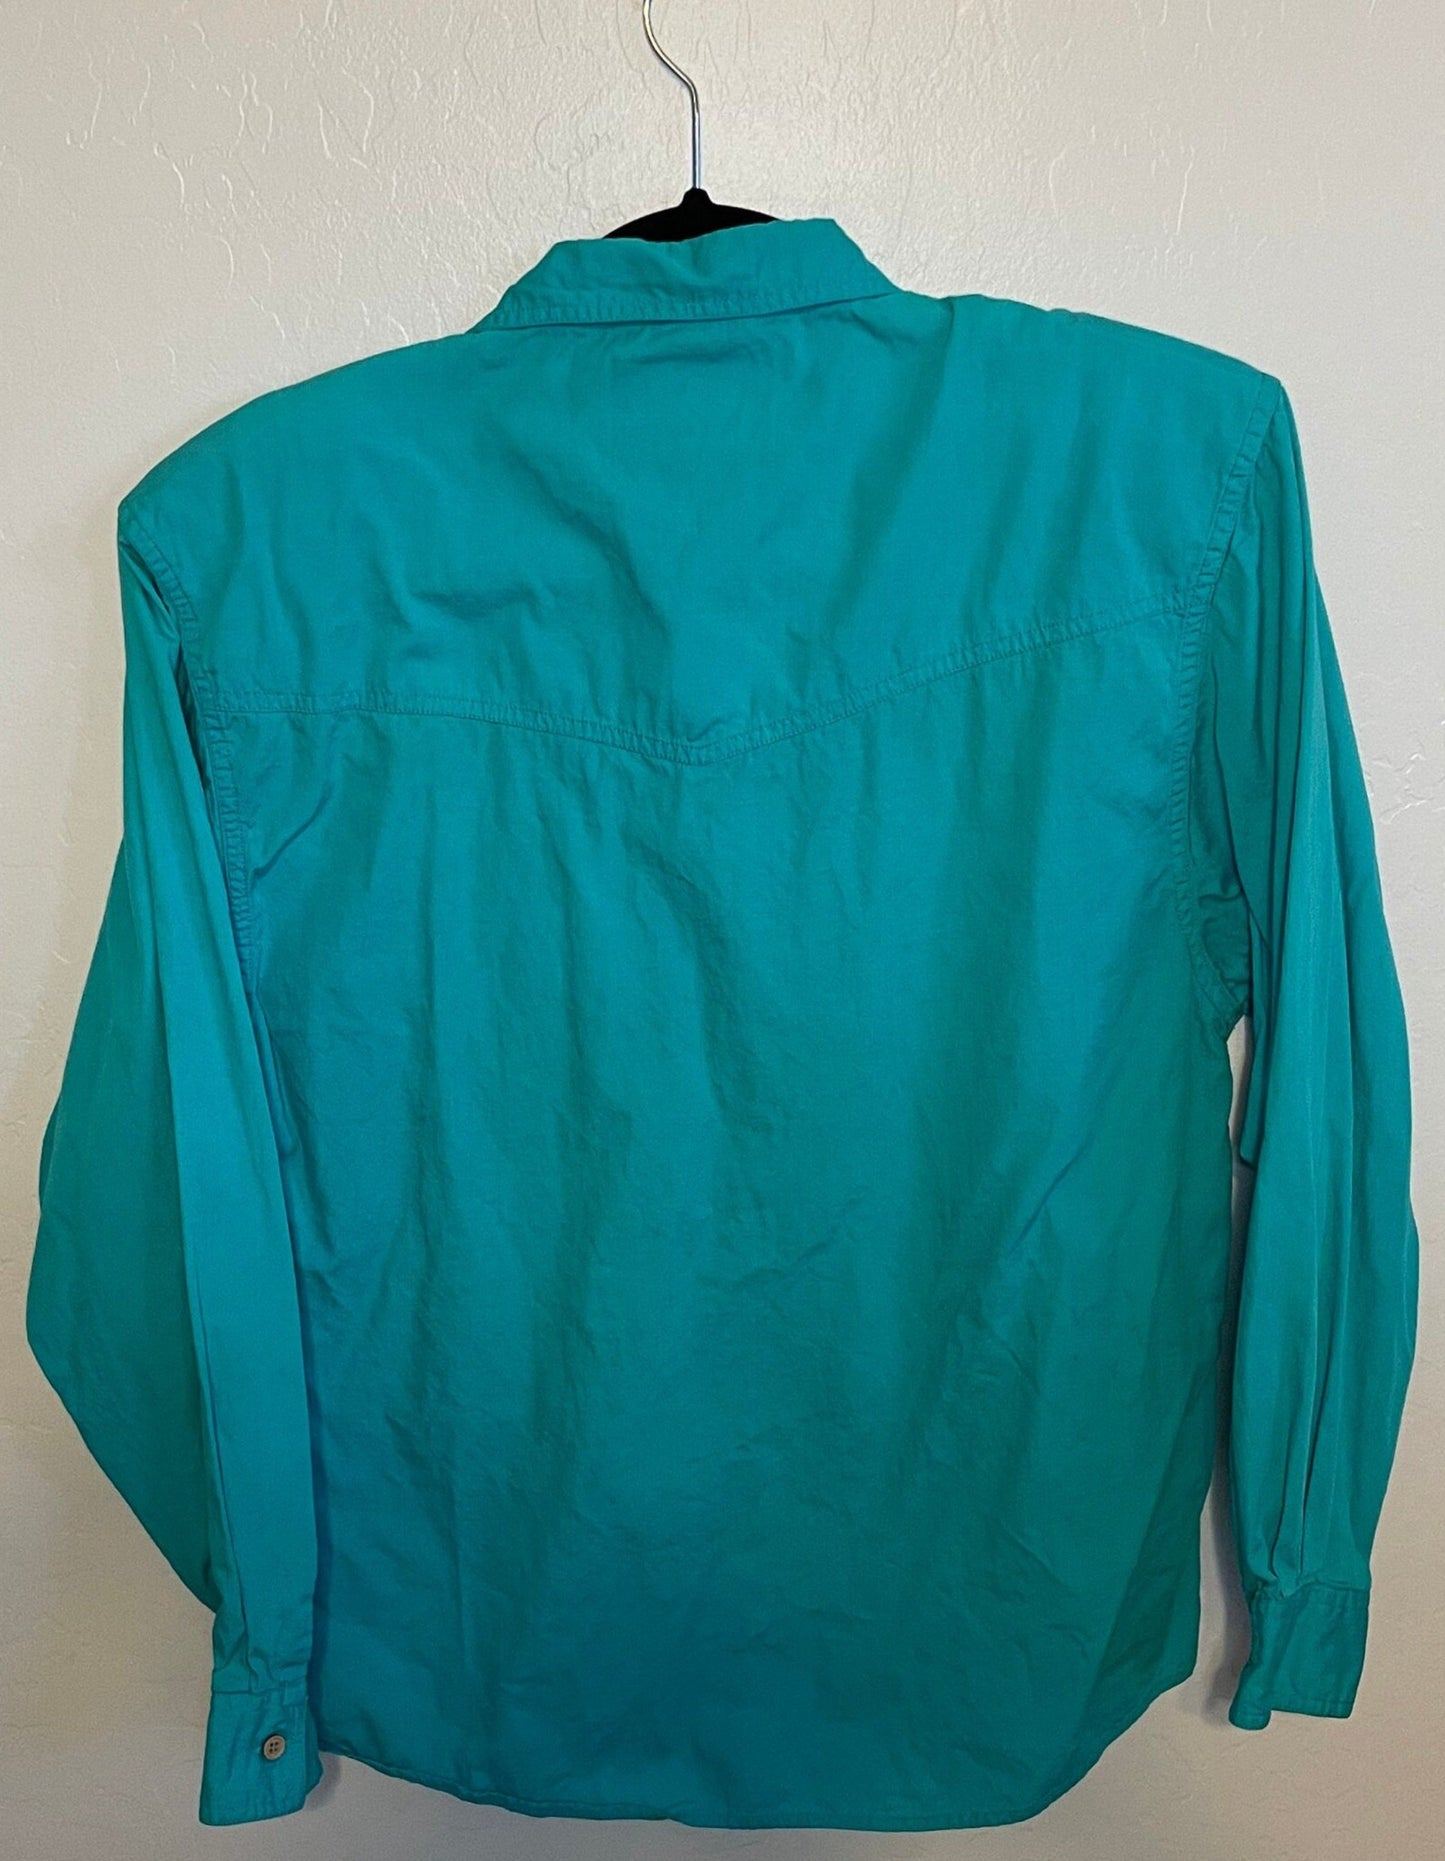 Vintage Teal Long Sleeve with Embroidery